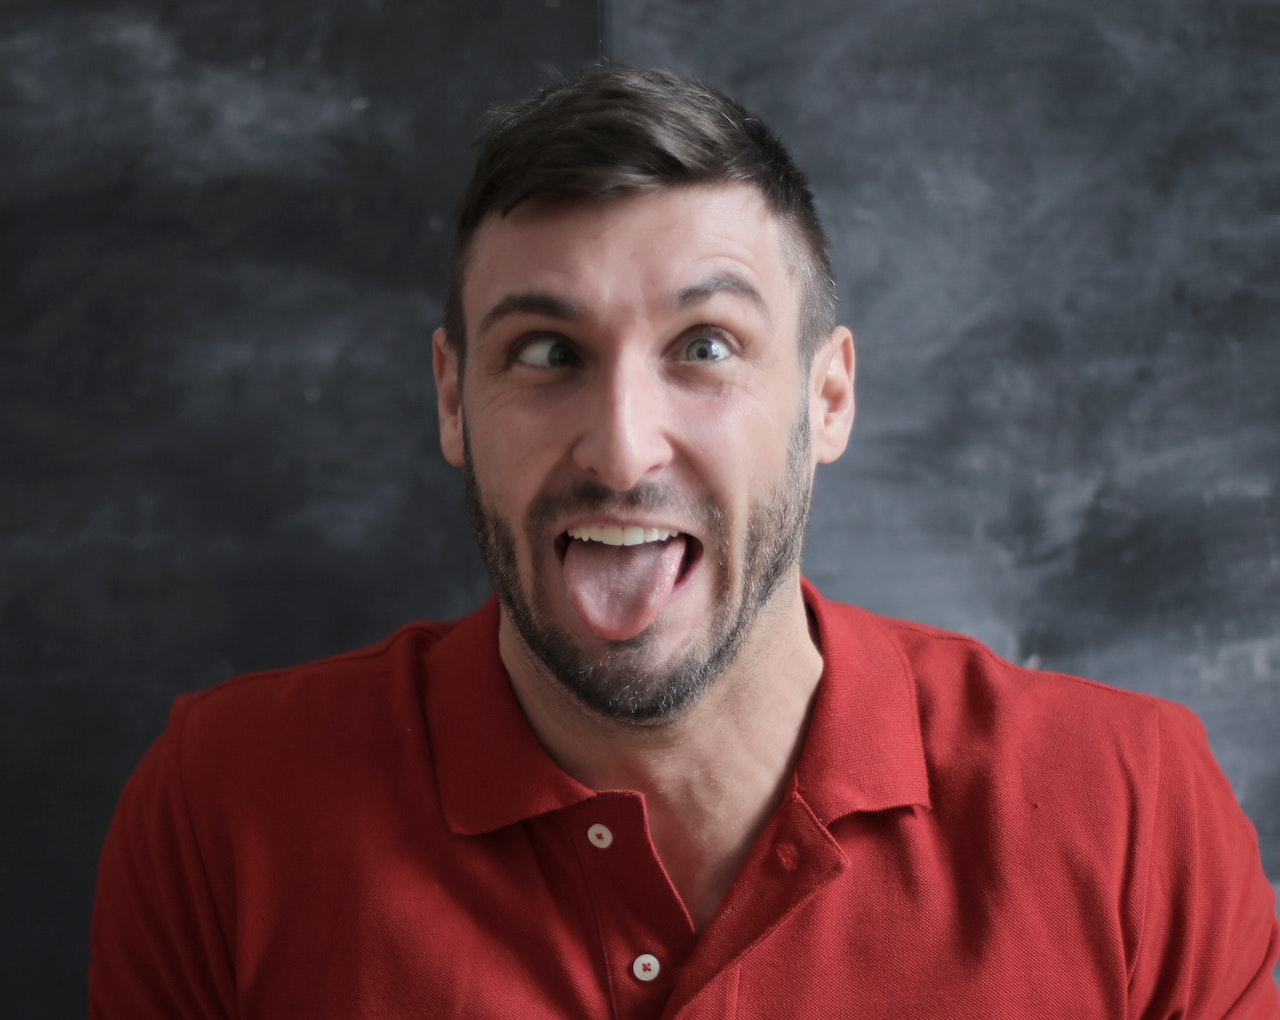 Man sticks out his tongue - causes and solutions for bad breath